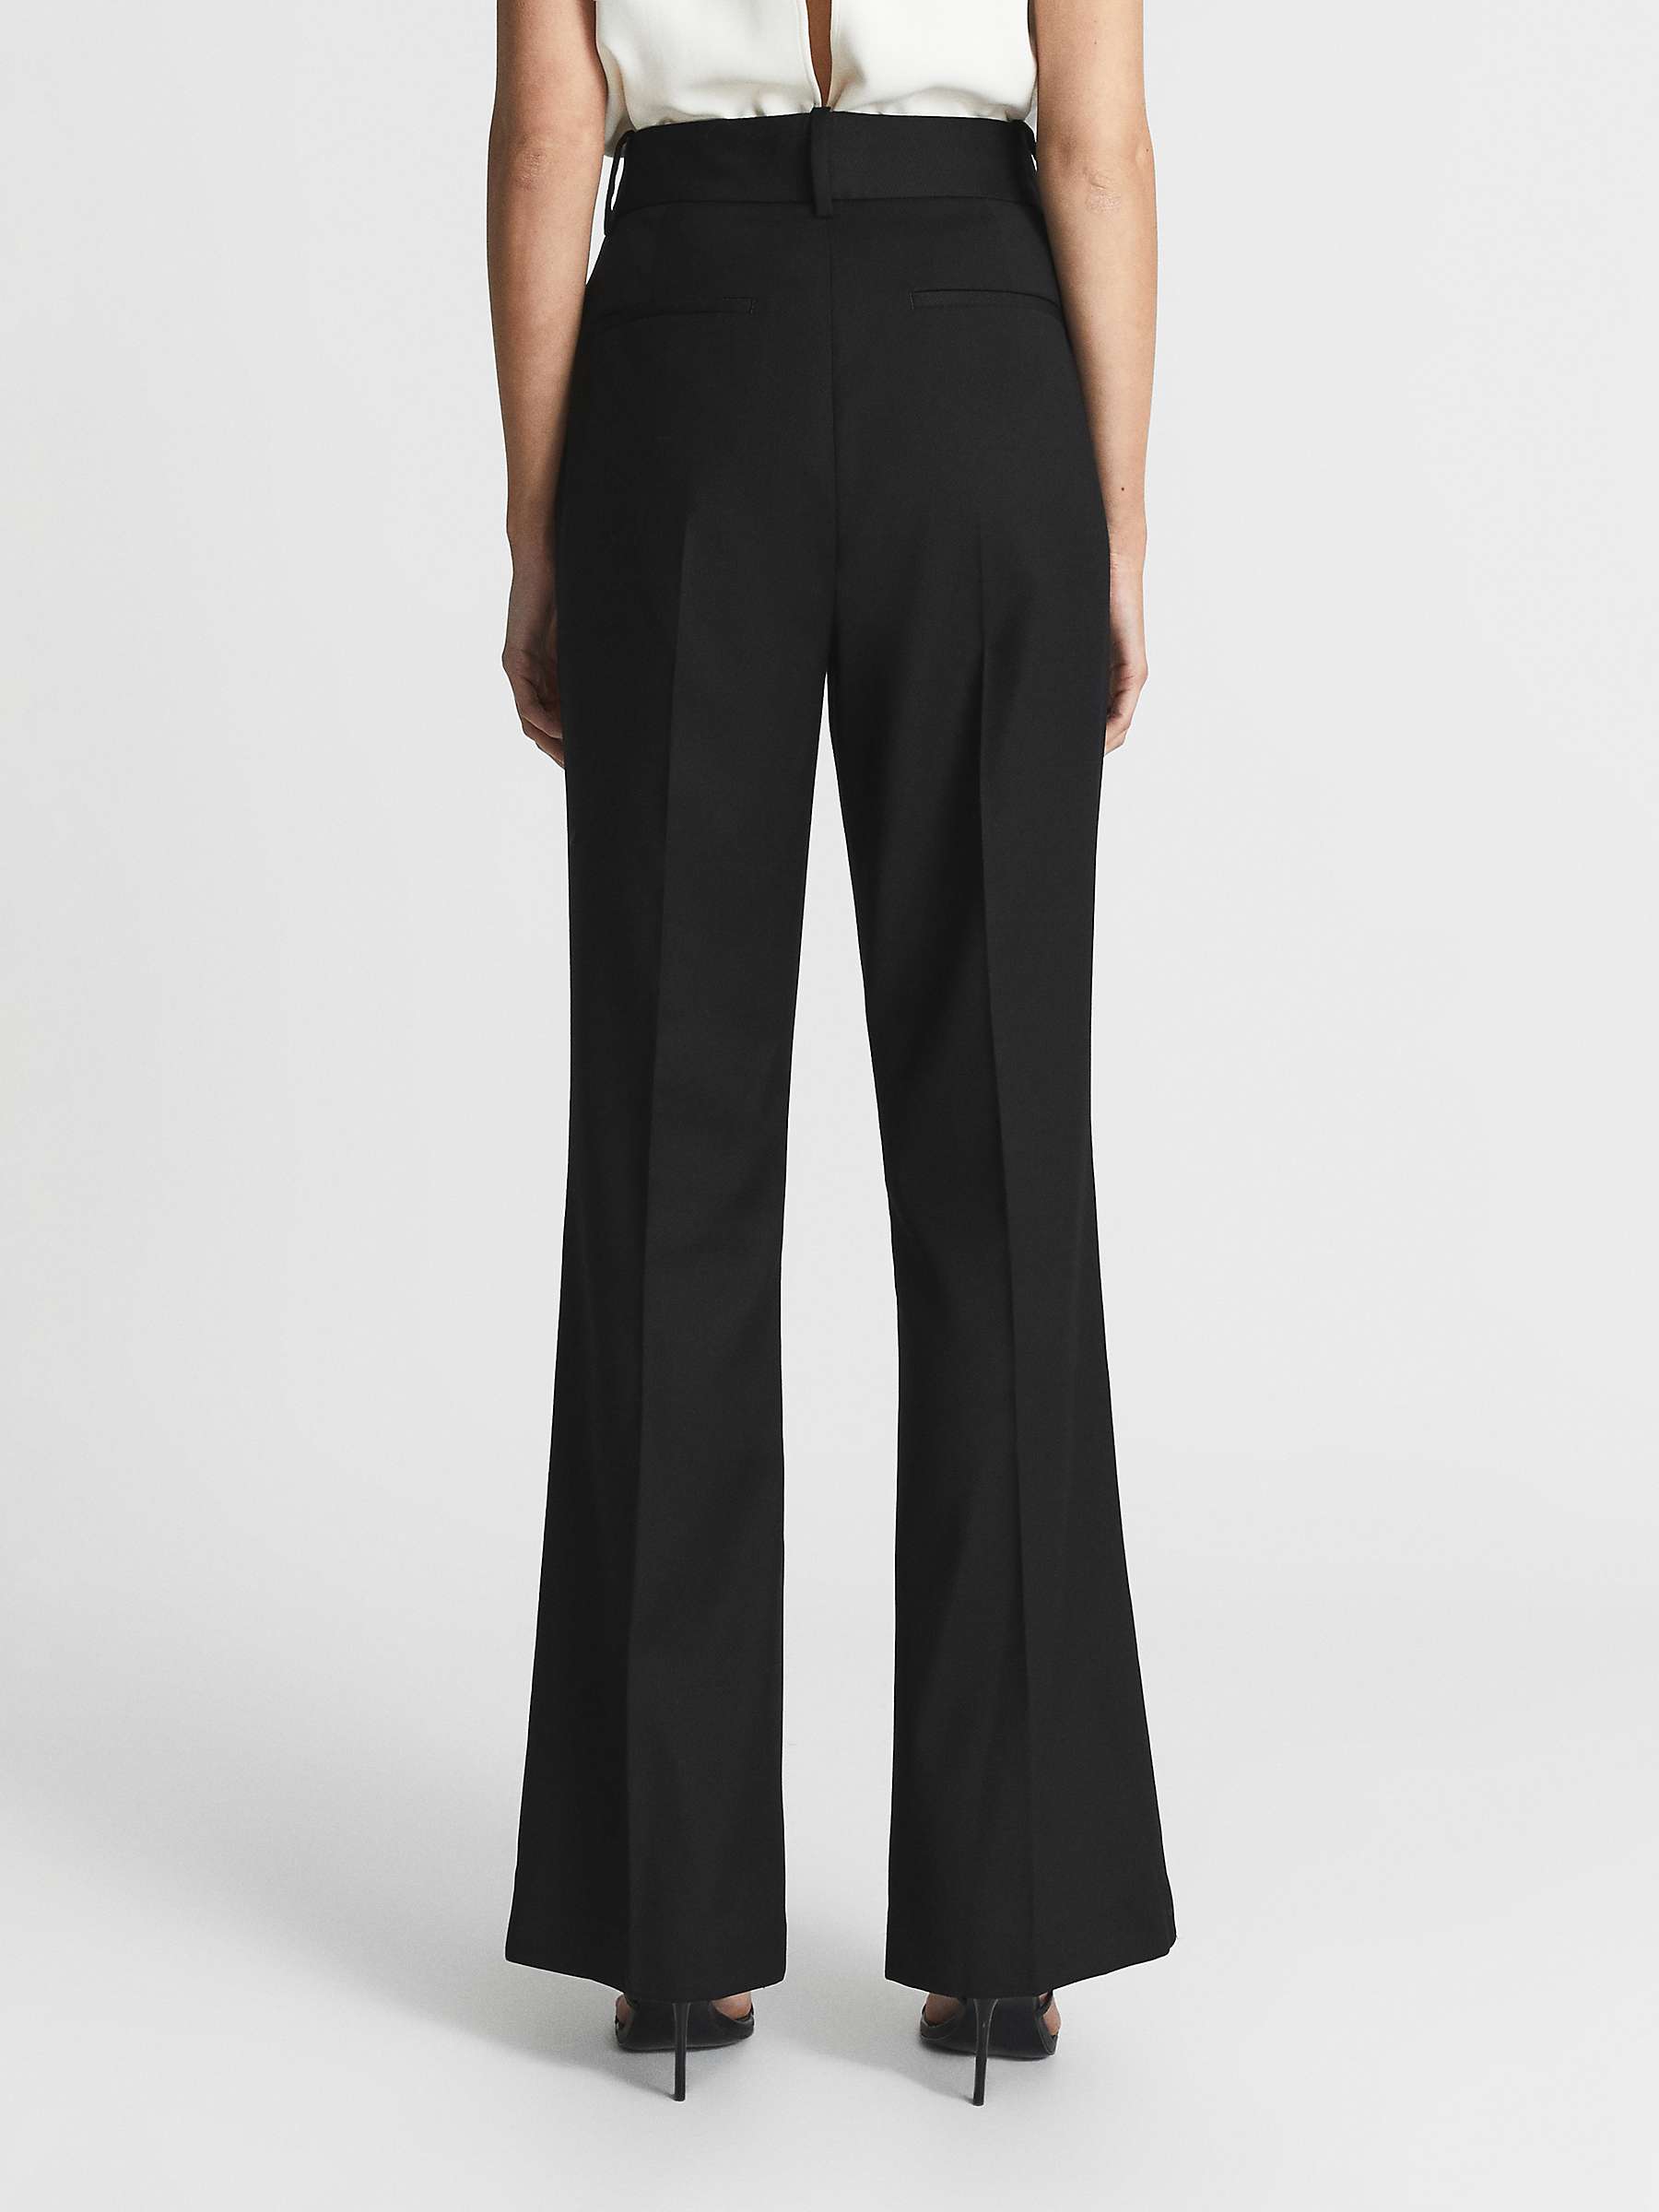 Buy Reiss Haisley Tailored Flare Trousers Online at johnlewis.com